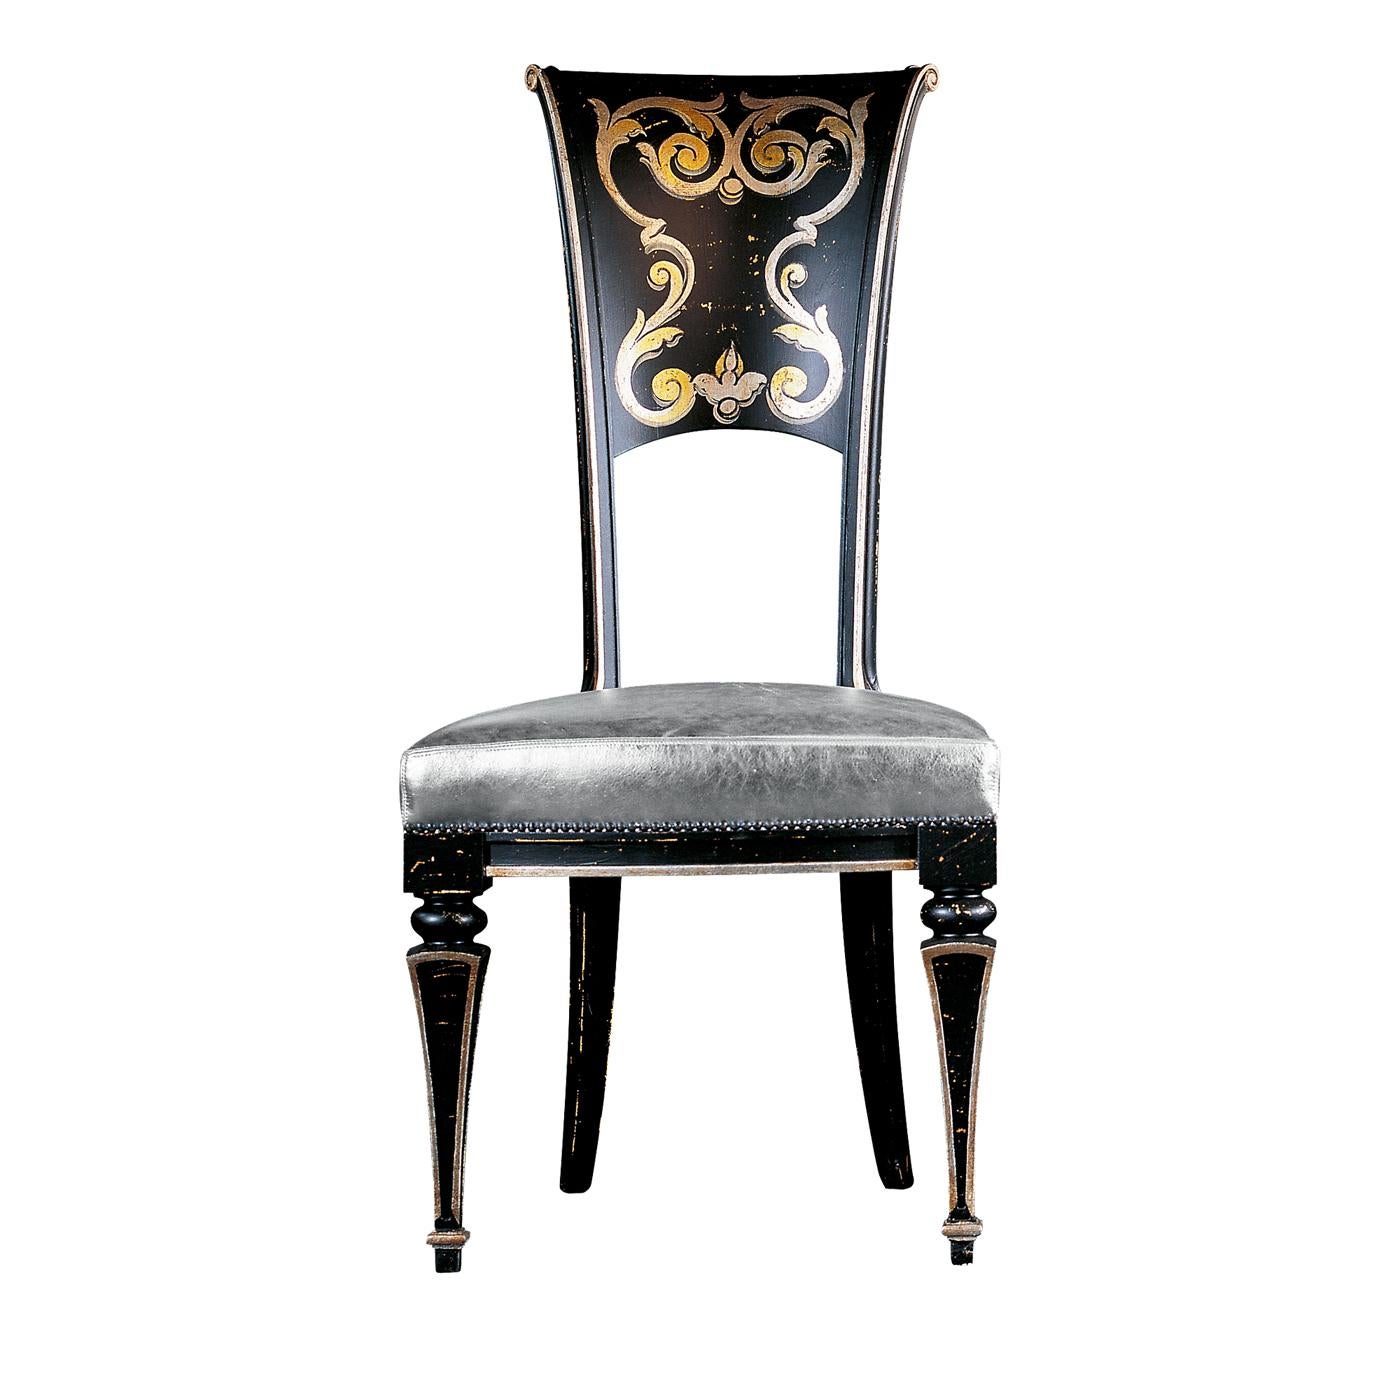 Unique and sophisticated, this chair will be a magnificent accent piece to showcase in both a Classic and a contemporary interior. Its solid wood structure is entirely handcrafted and features a combination of traditional-inspired elements and an